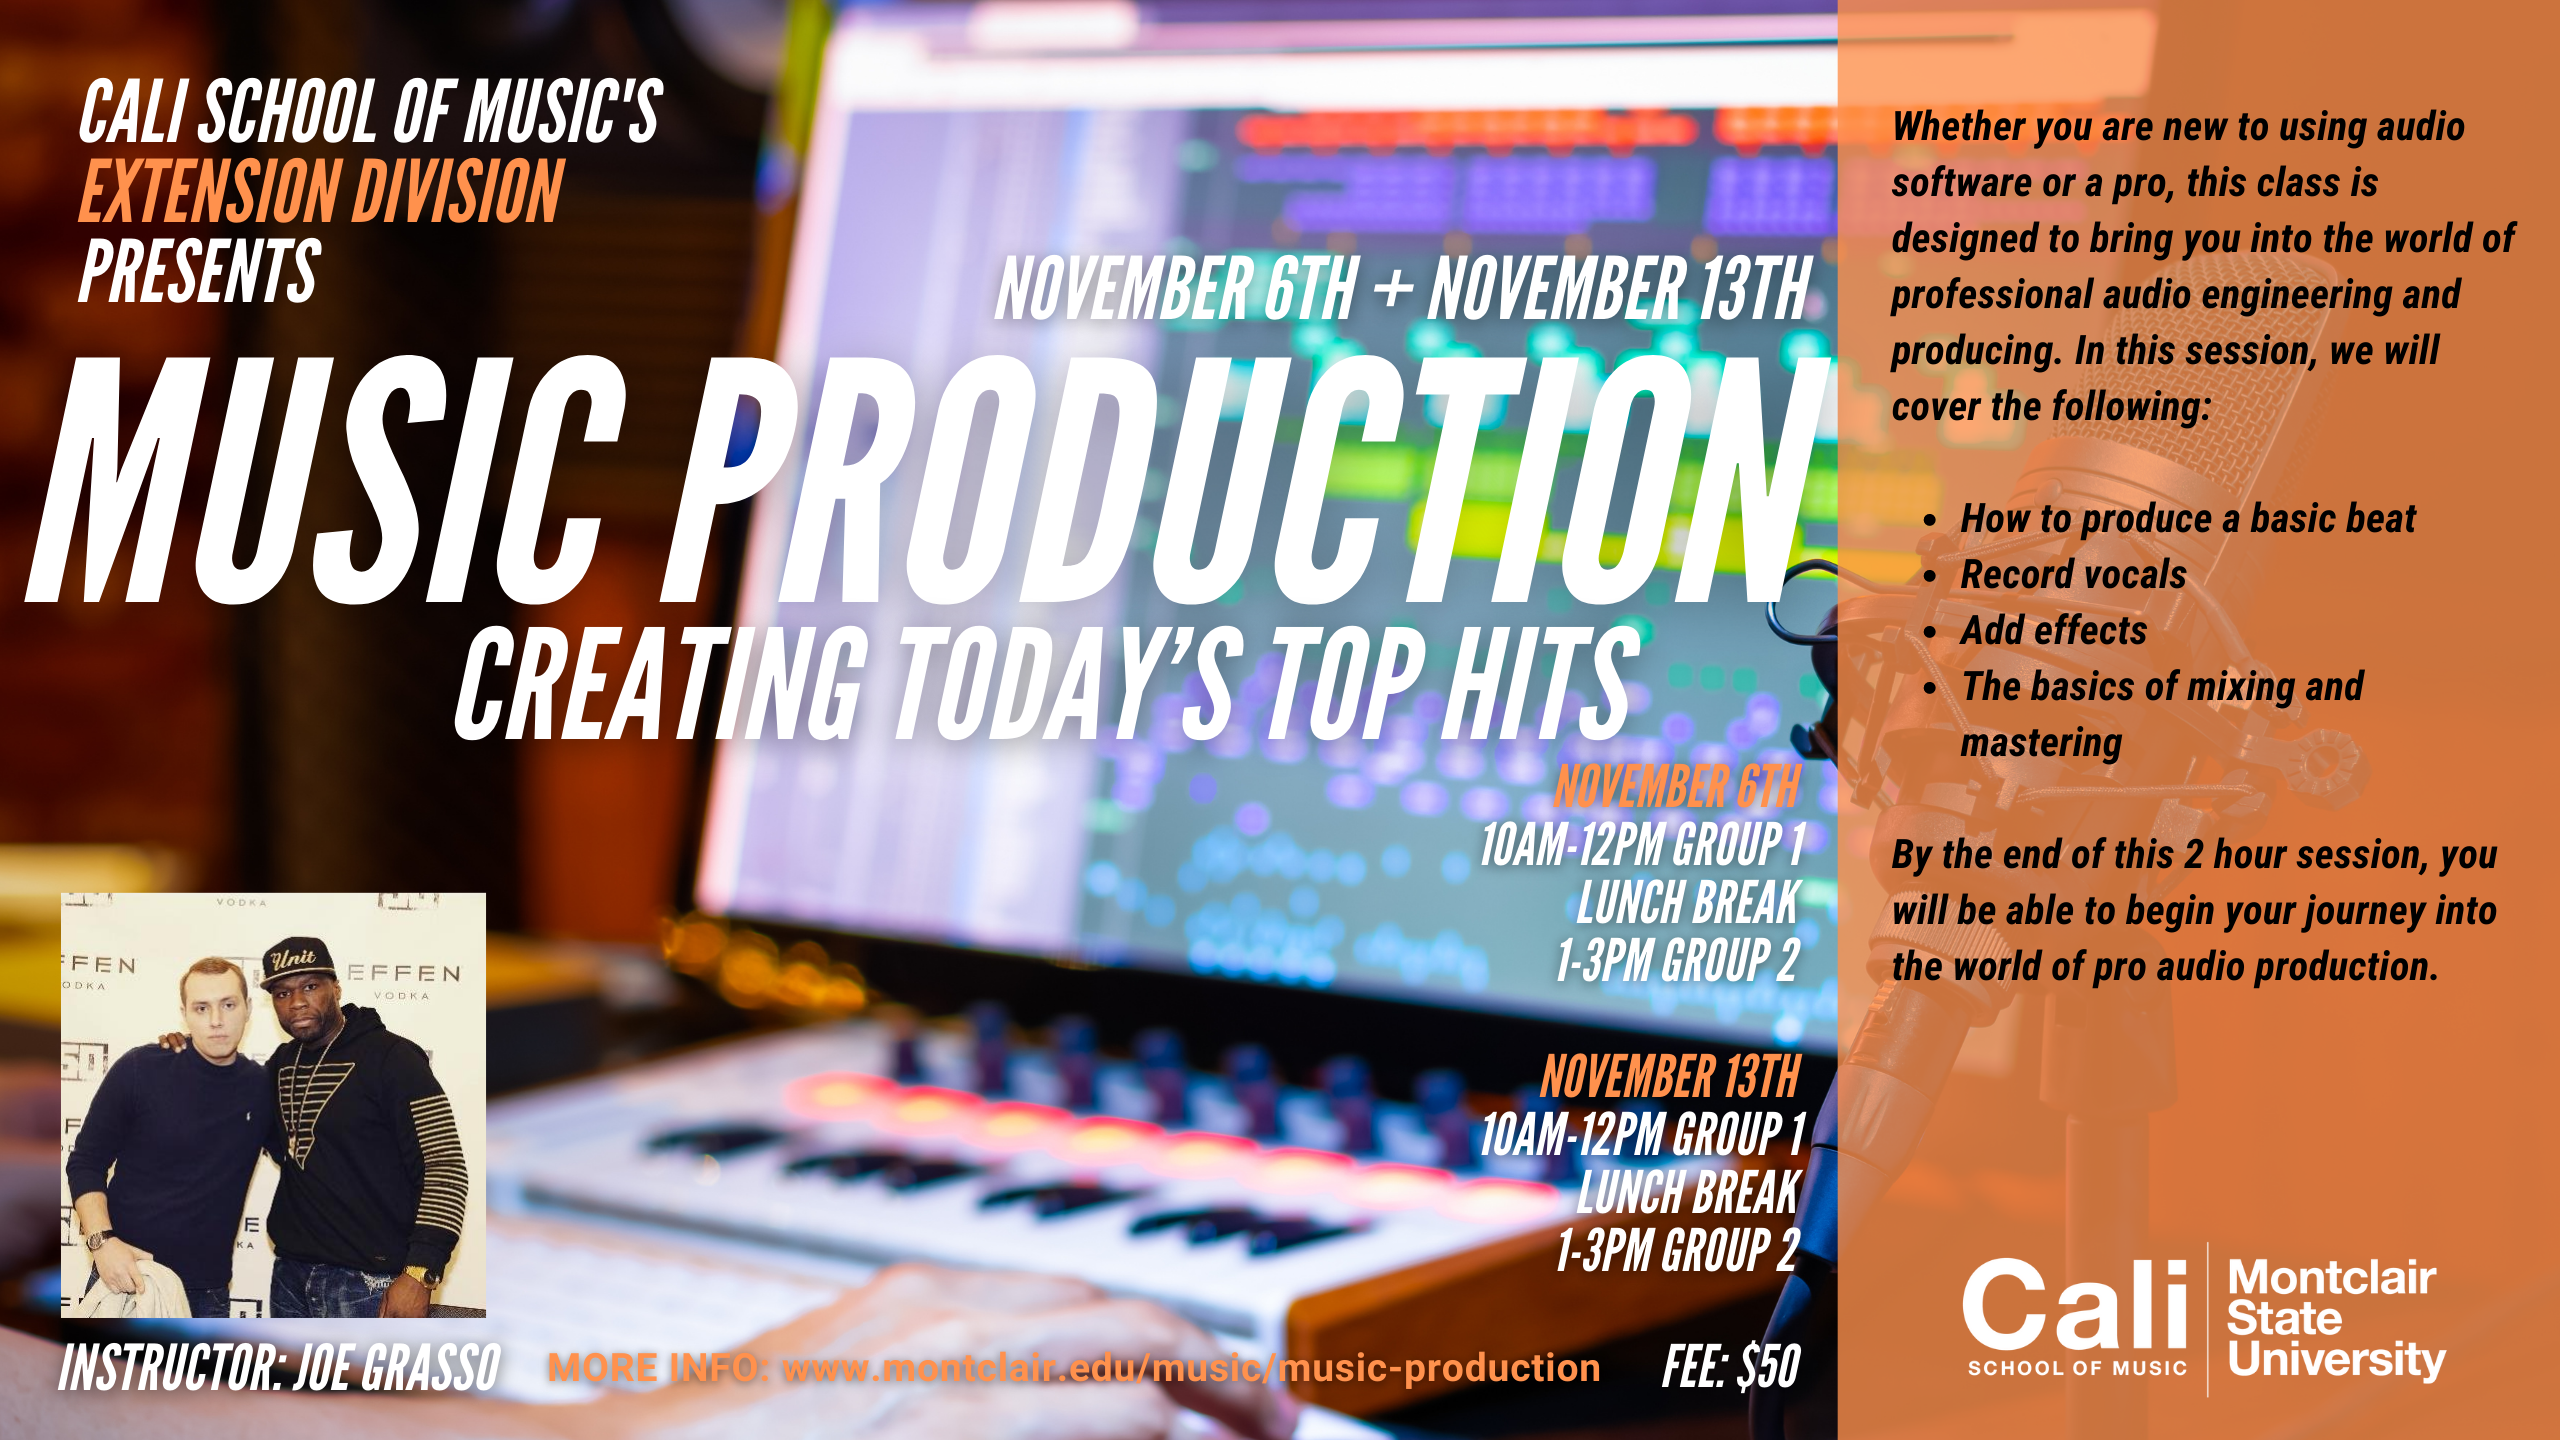 Music Production: Creating Your Top Hits